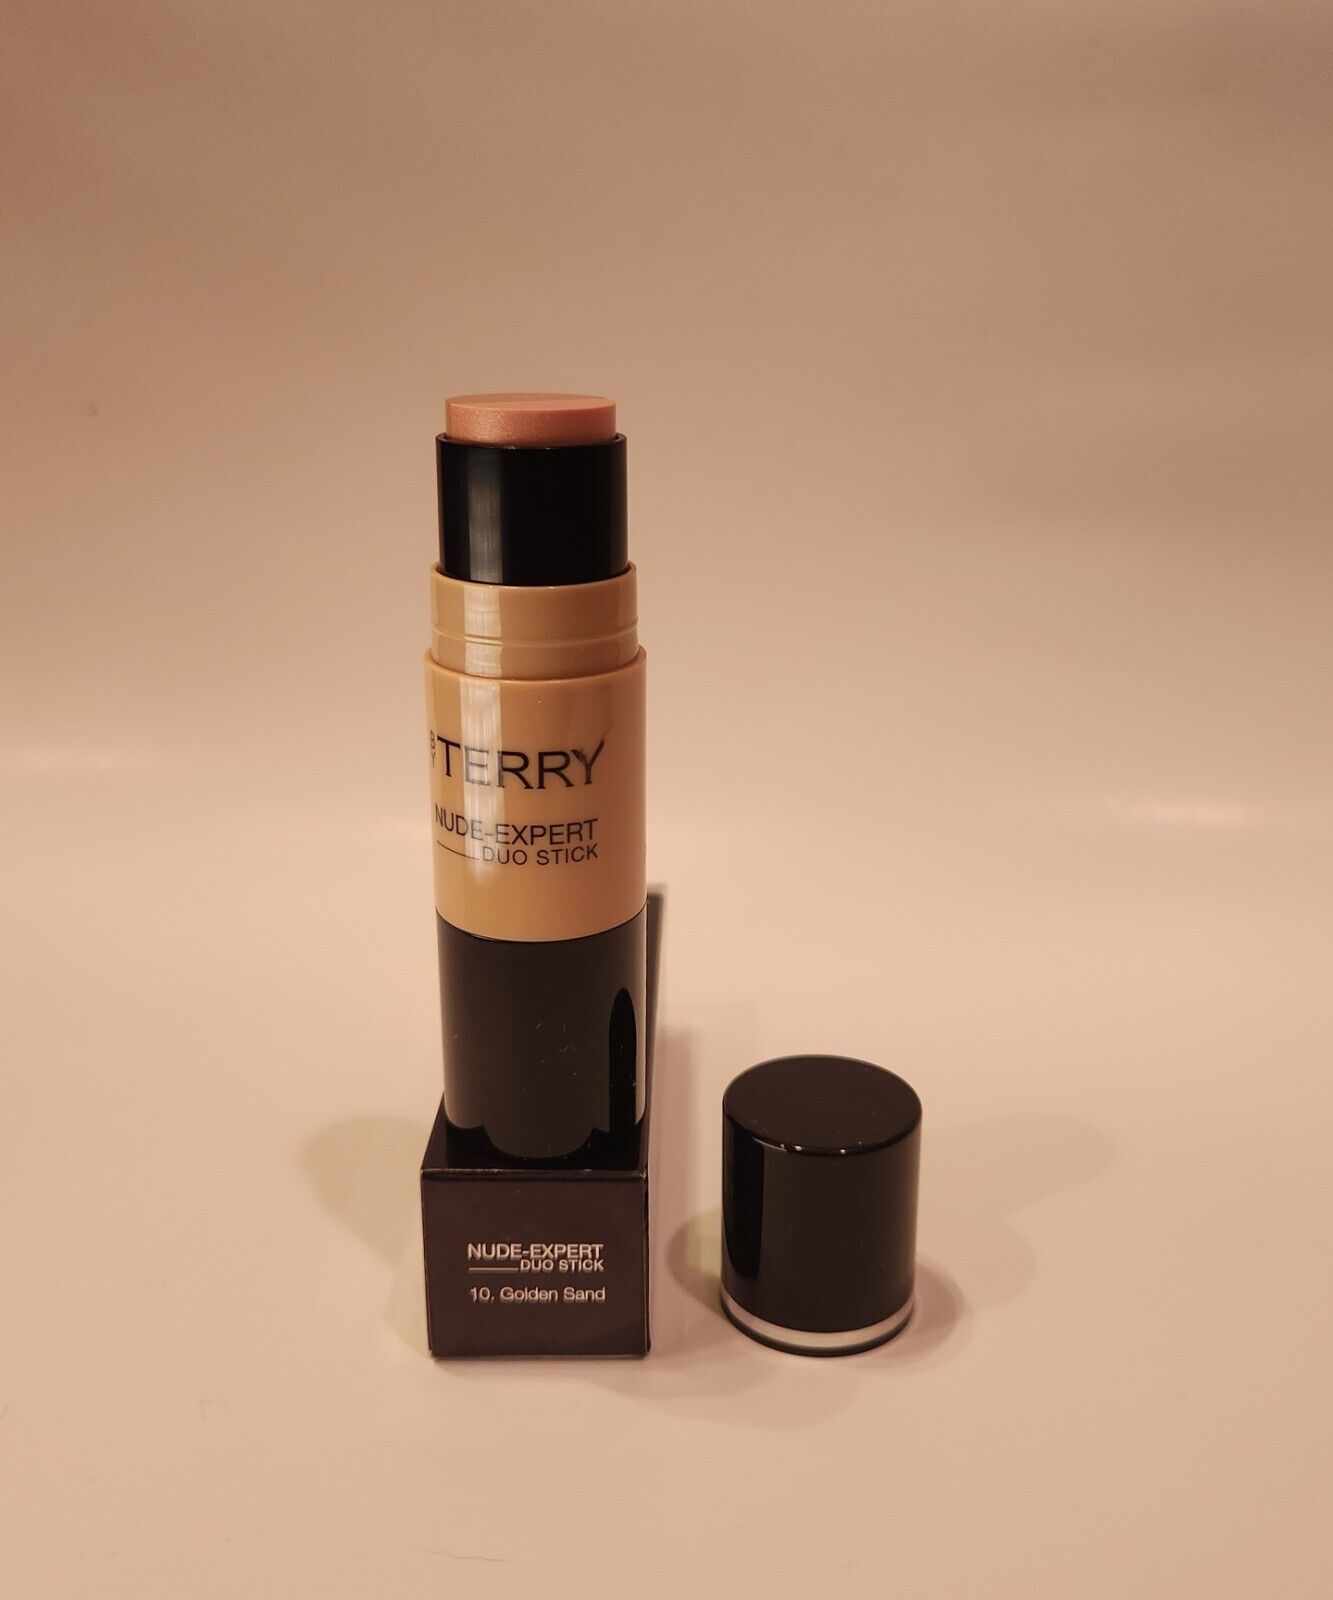 Primary image for By Terry Nude-Expert Duo Stick Foundation: 10. Golden Sand, 0.3oz